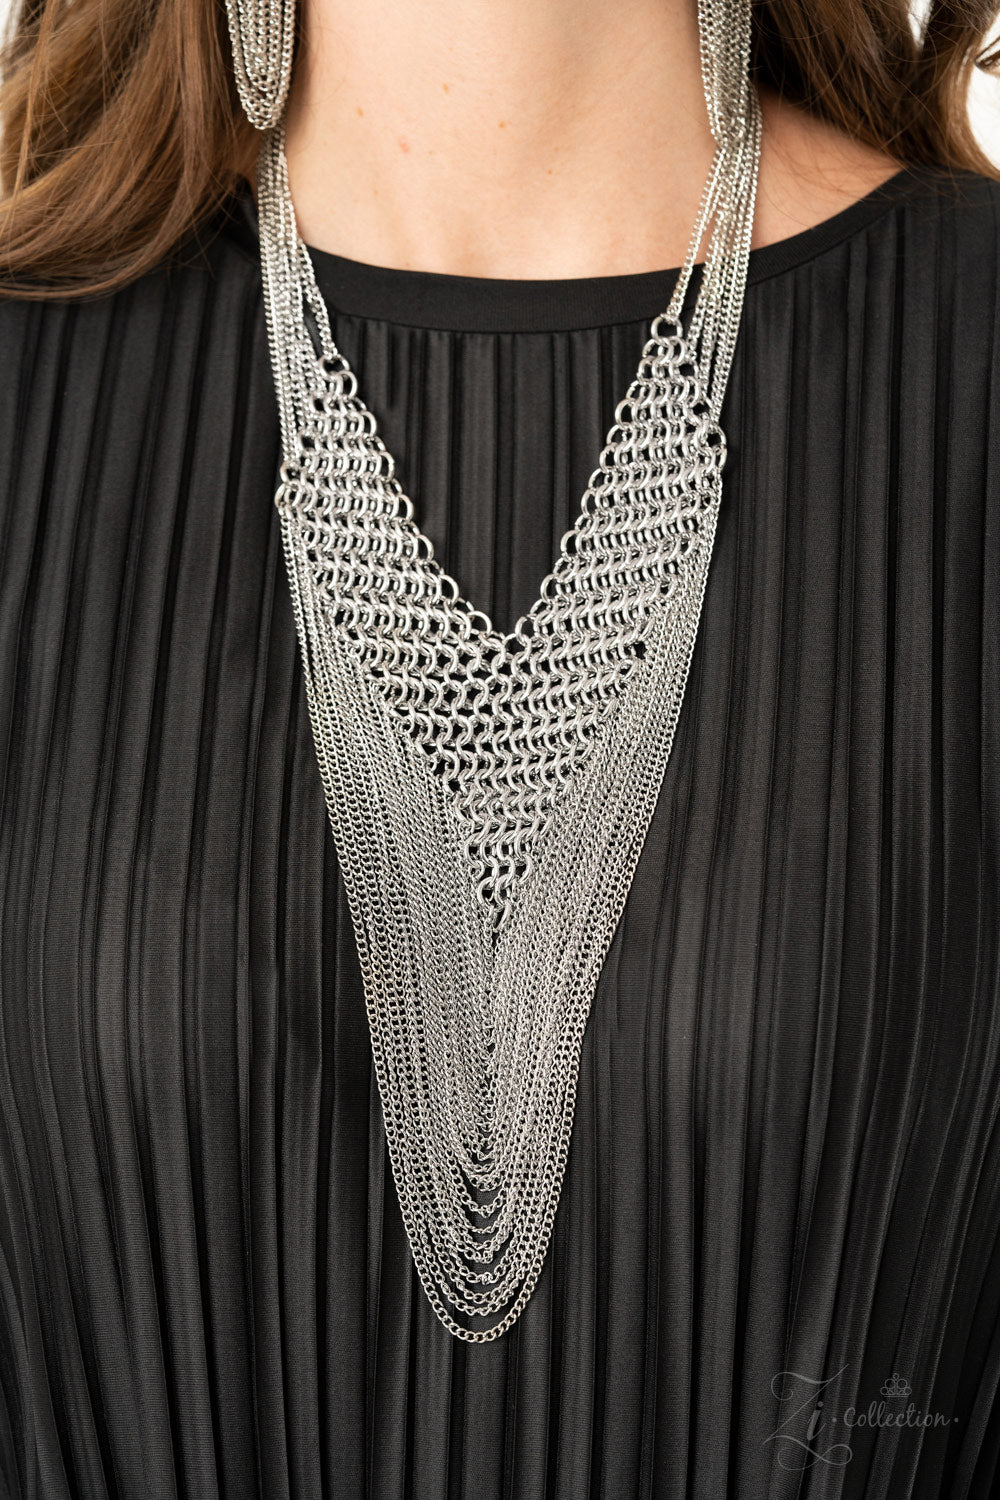 Defiant Silver Chain Necklace - 2020 Zi Collection - Paparazzi Accessories - Paparazzi Accessories 